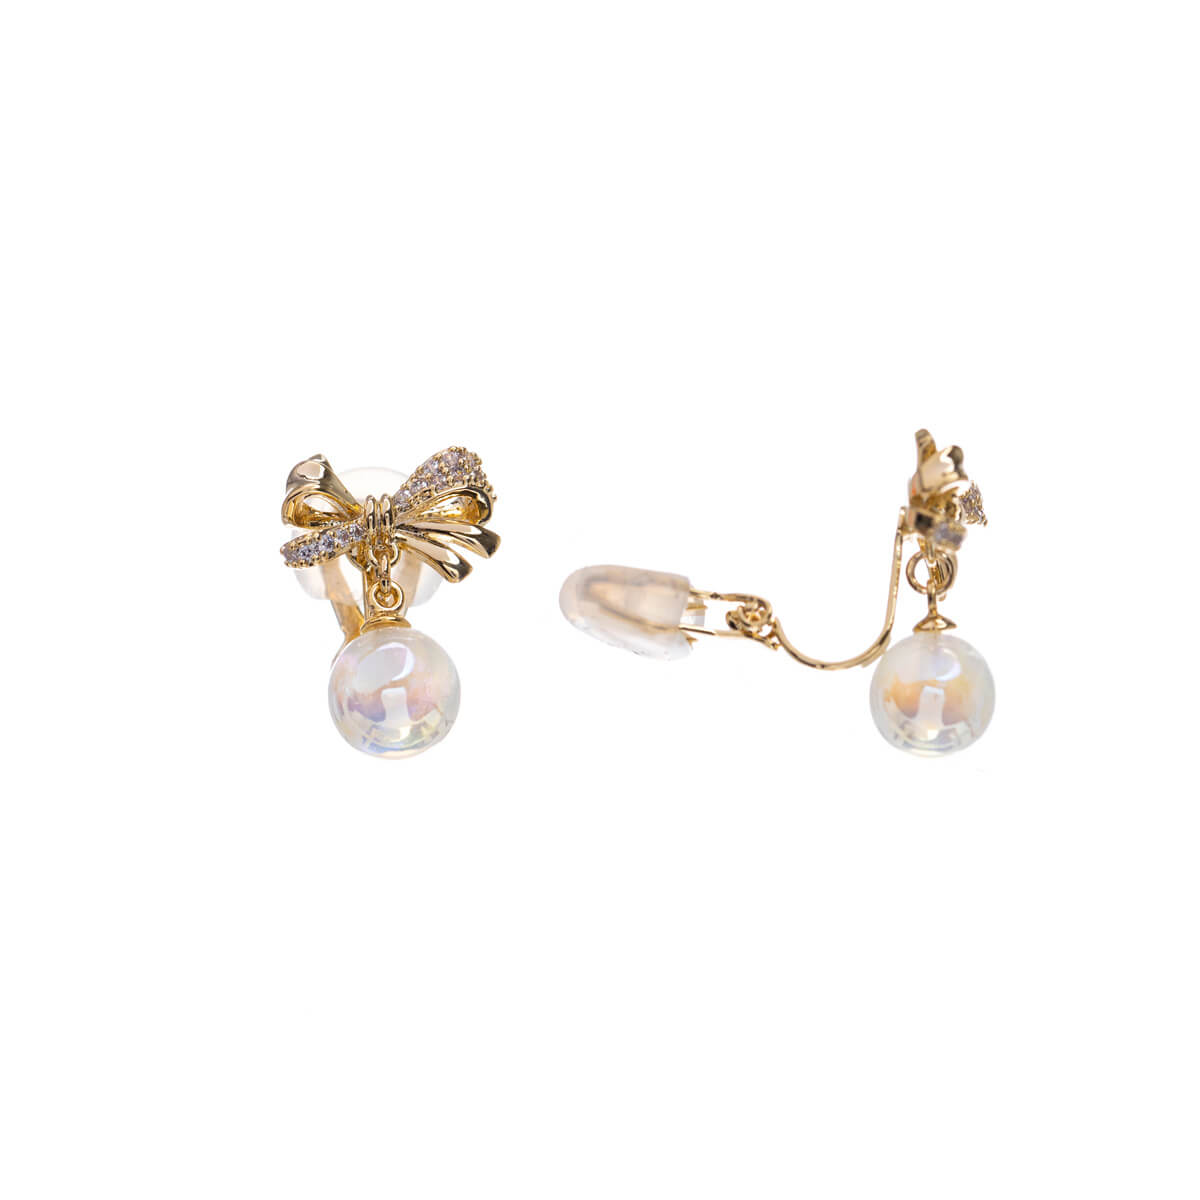 Bow tie clip earrings with pearl and zircons